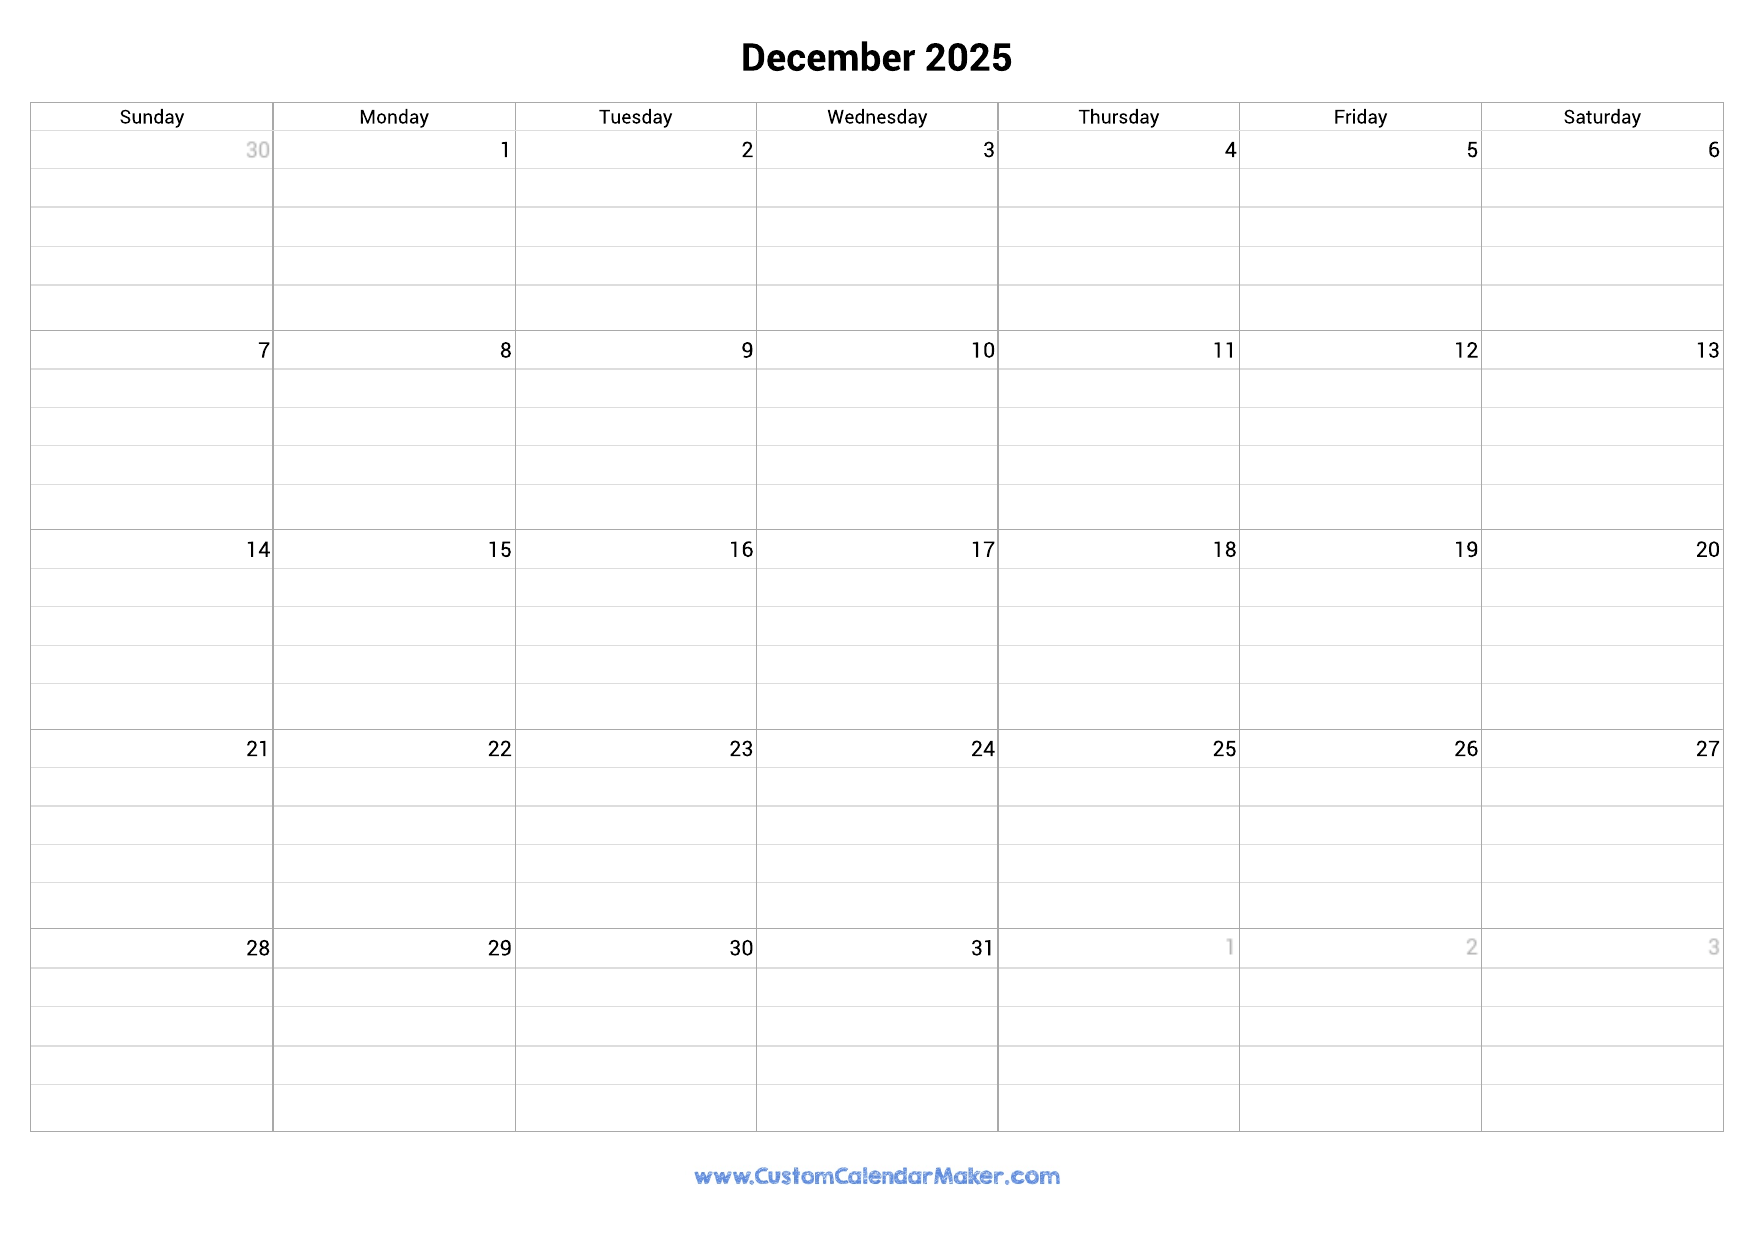 december-2025-fillable-calendar-grid-with-lines